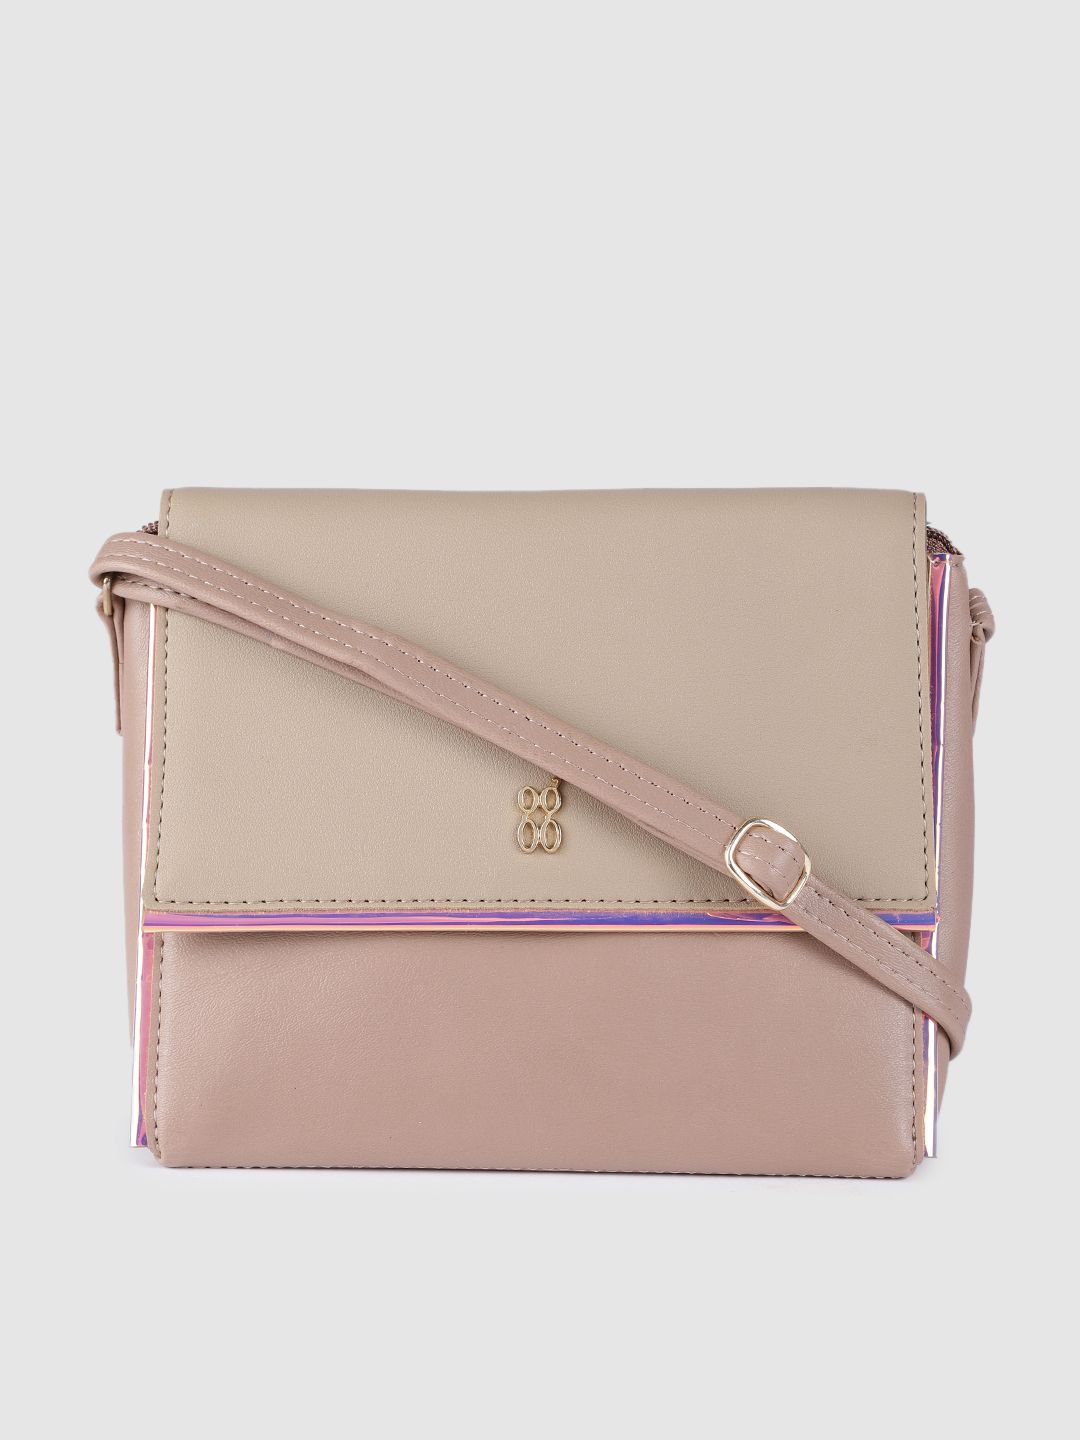 Baggit Dusty Pink & Beige Solid Regular Structured Sling Bag Price in India